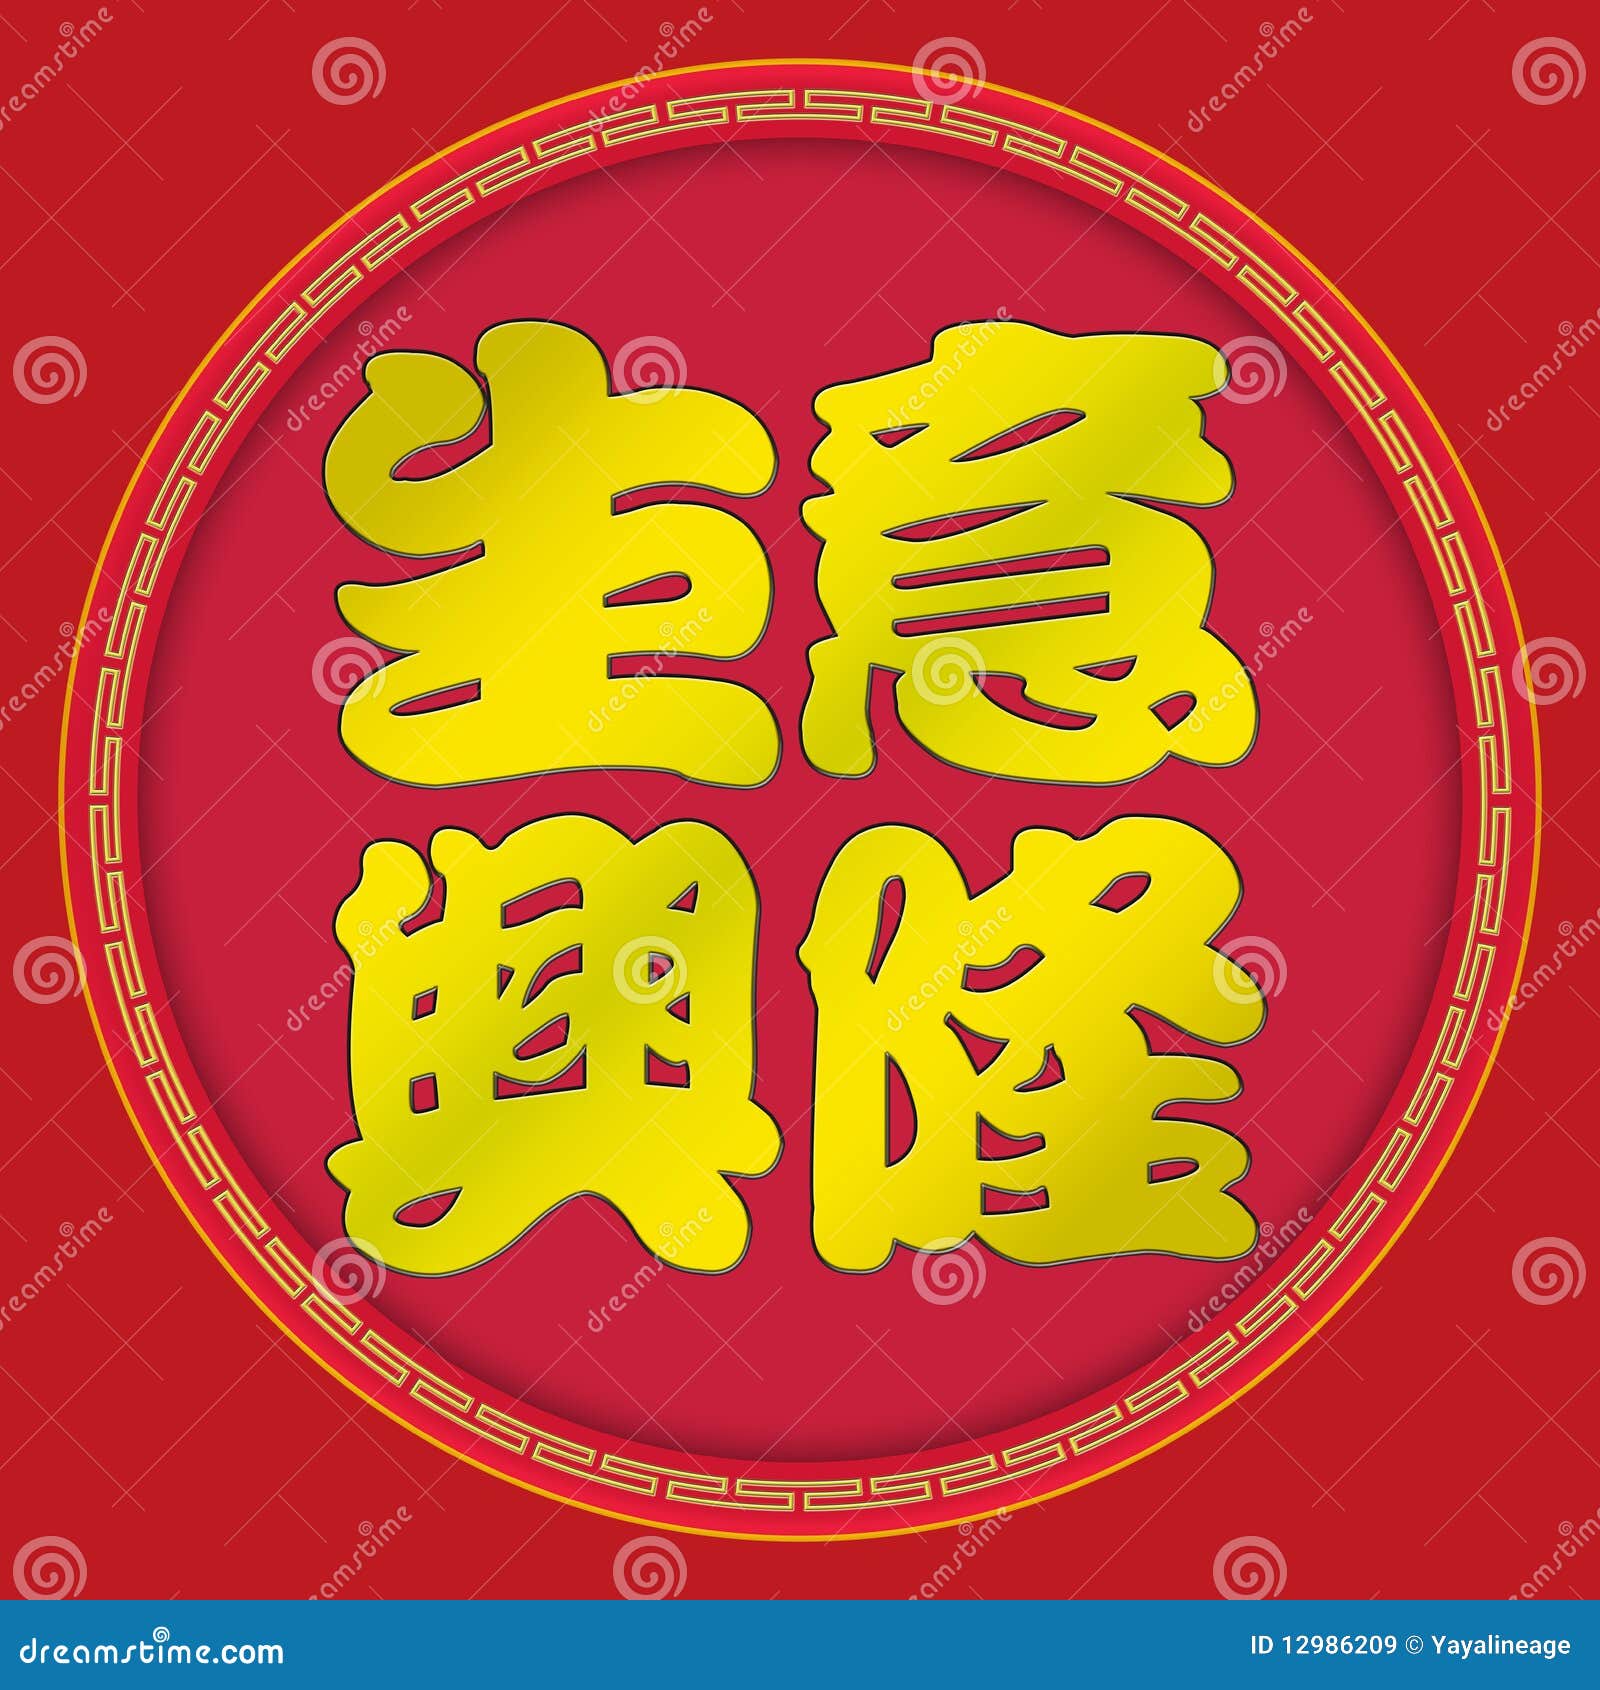 Business Prosperity - Chinese New Year Royalty Free Stock Images